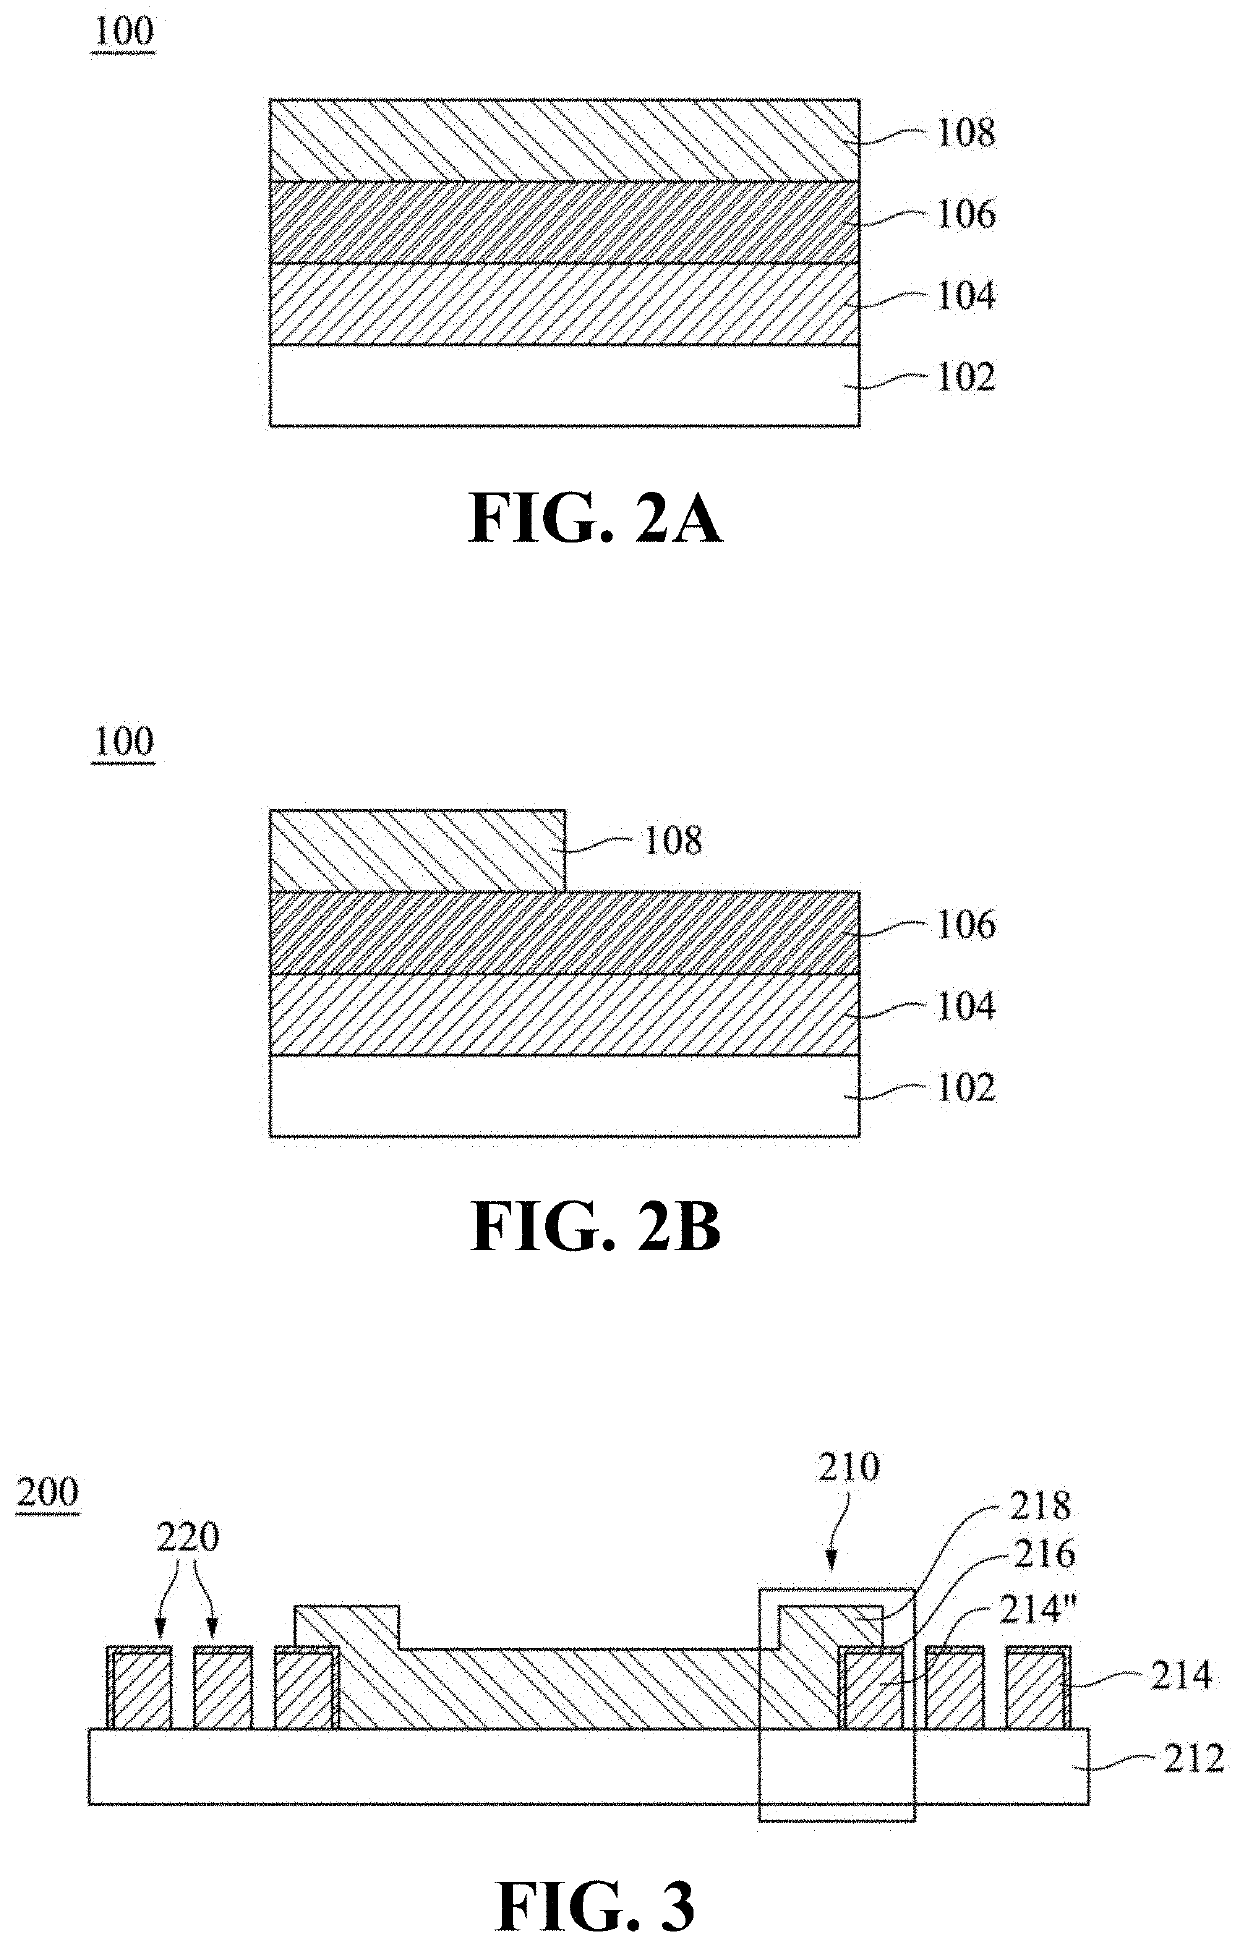 Contact structure and electronic device having the same